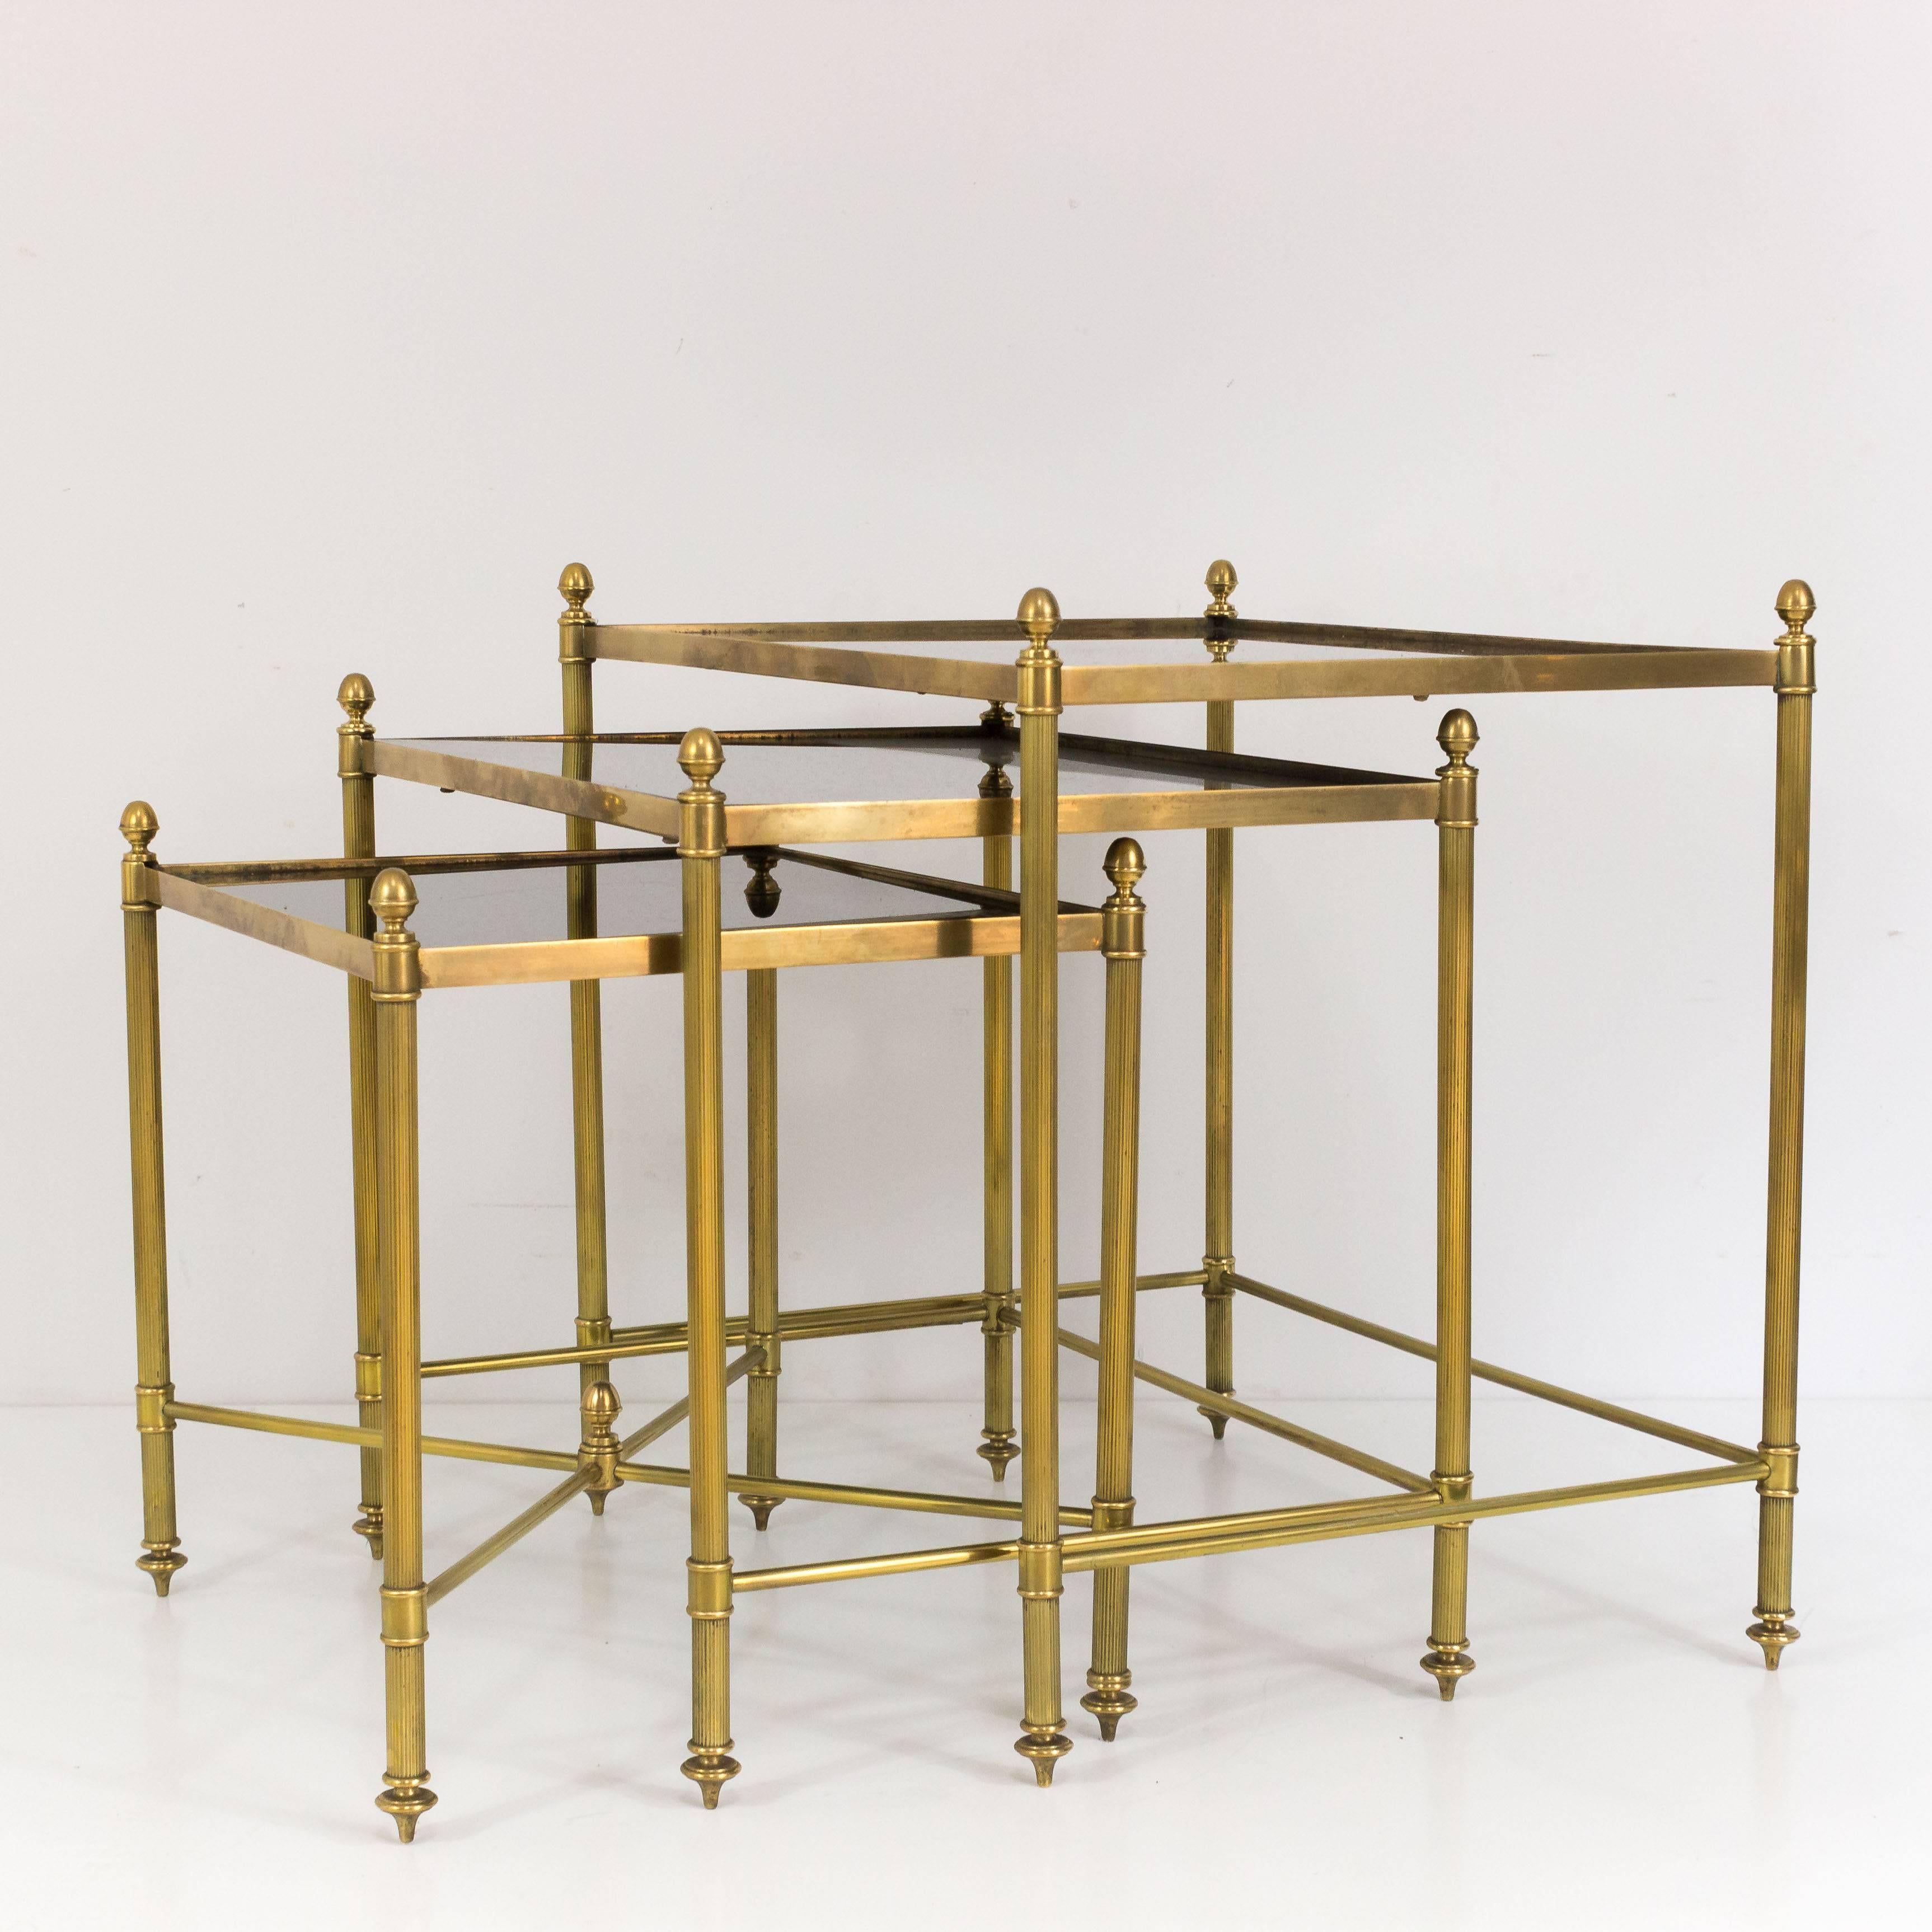 Handsome set of three nesting tables with brass frames and black mirrored glass, French, 1950s.

These tables are currently in France, please allow 2 to 4 weeks delivery to New York. Shipping costs from France to our warehouse in New York included